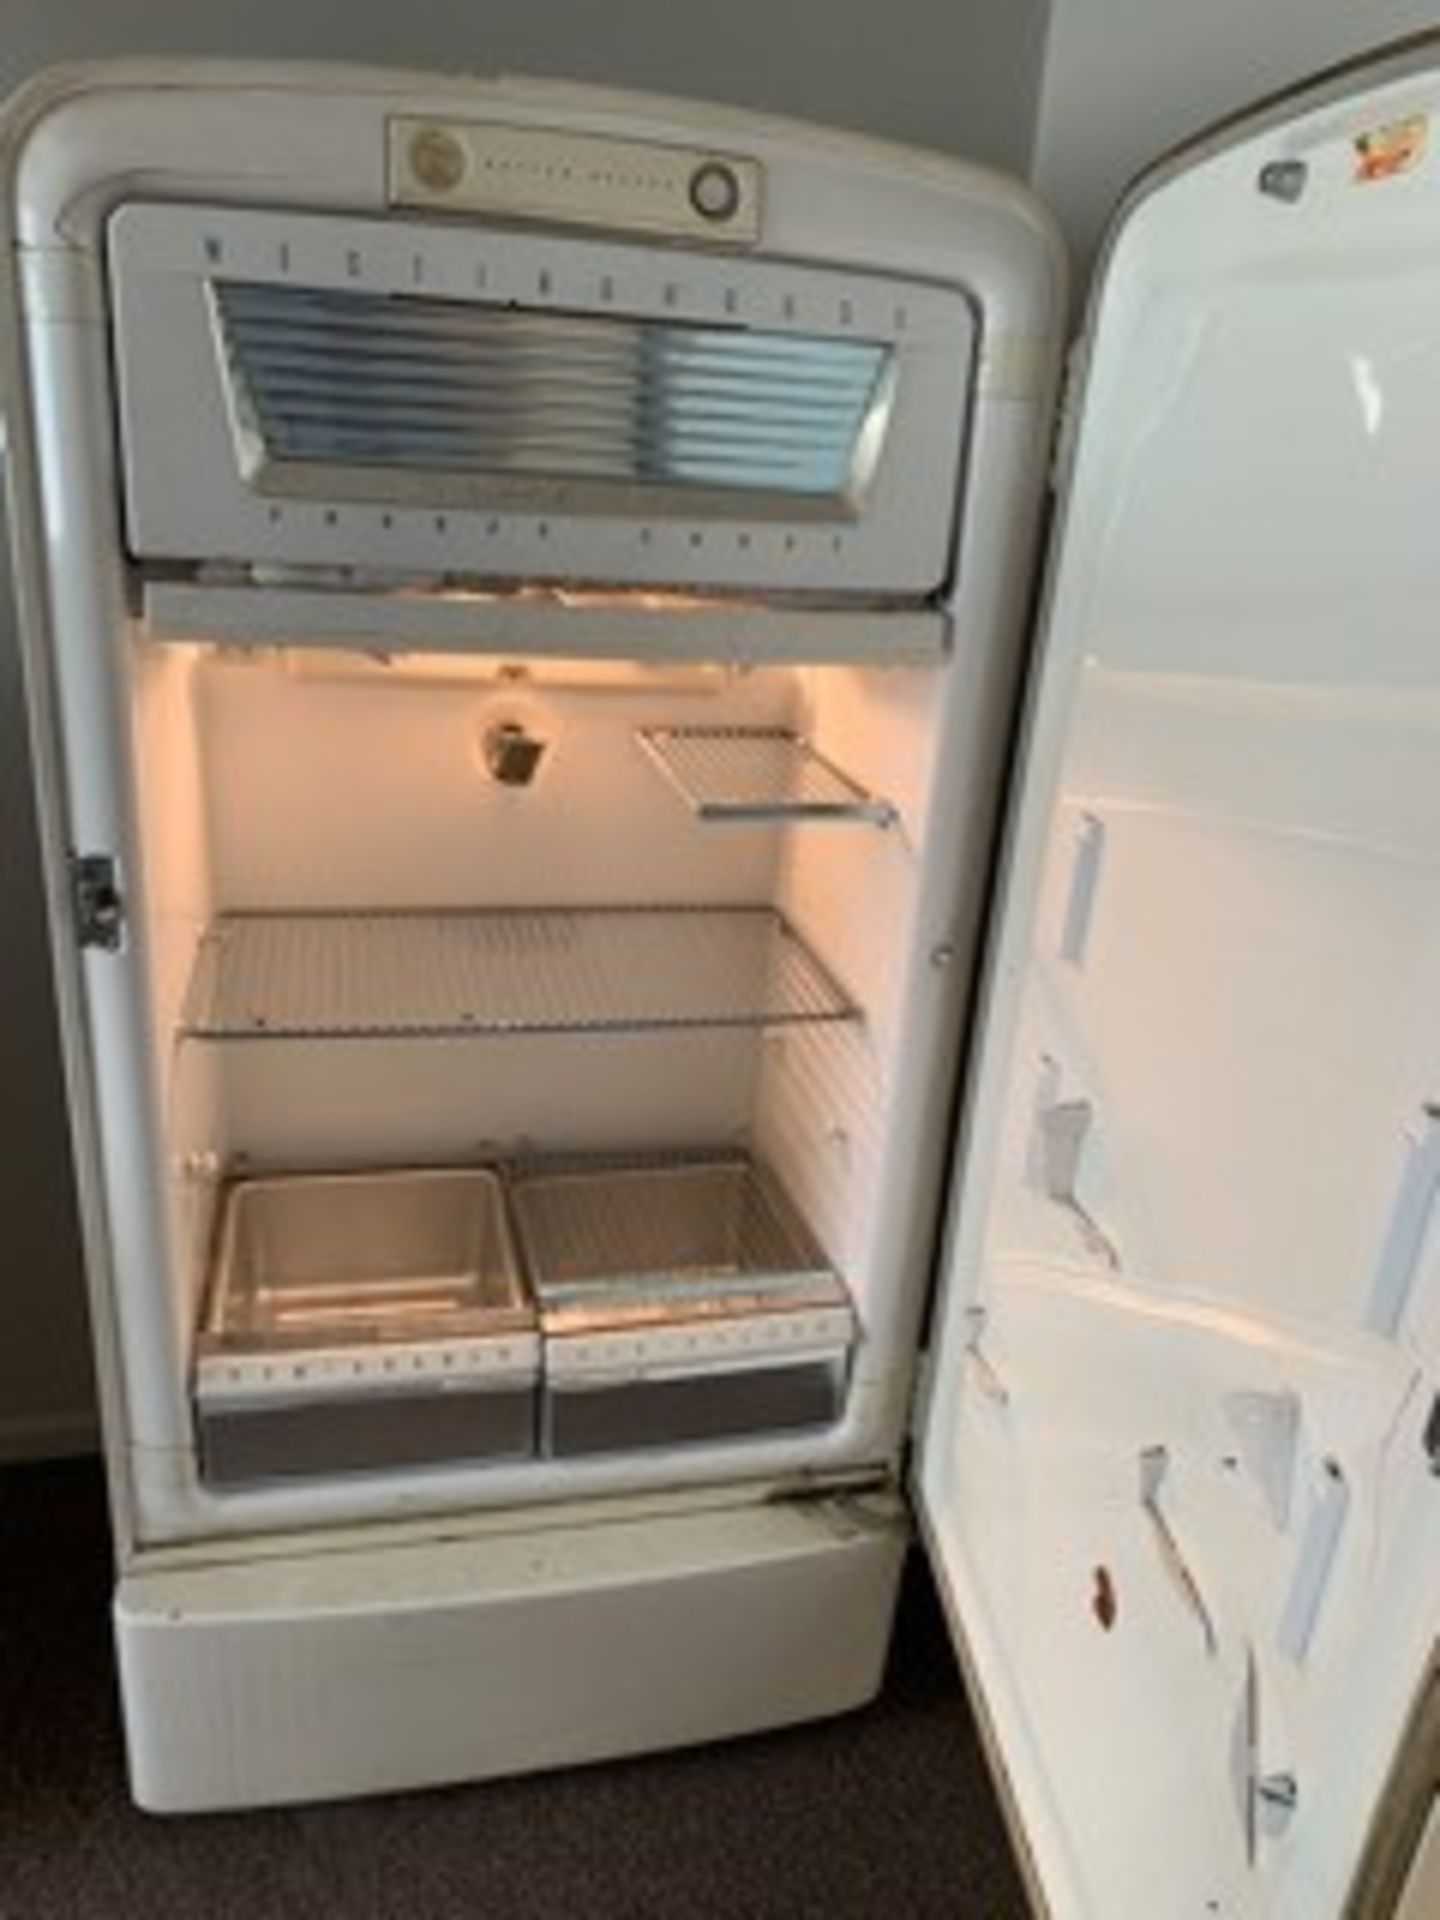 ANTIQUE WESTINGHOUSE REFRIGERATOR (LOCATED AT: 16335 LIMA ROAD, HUNTERTOWN, IN 46748) - Image 2 of 2